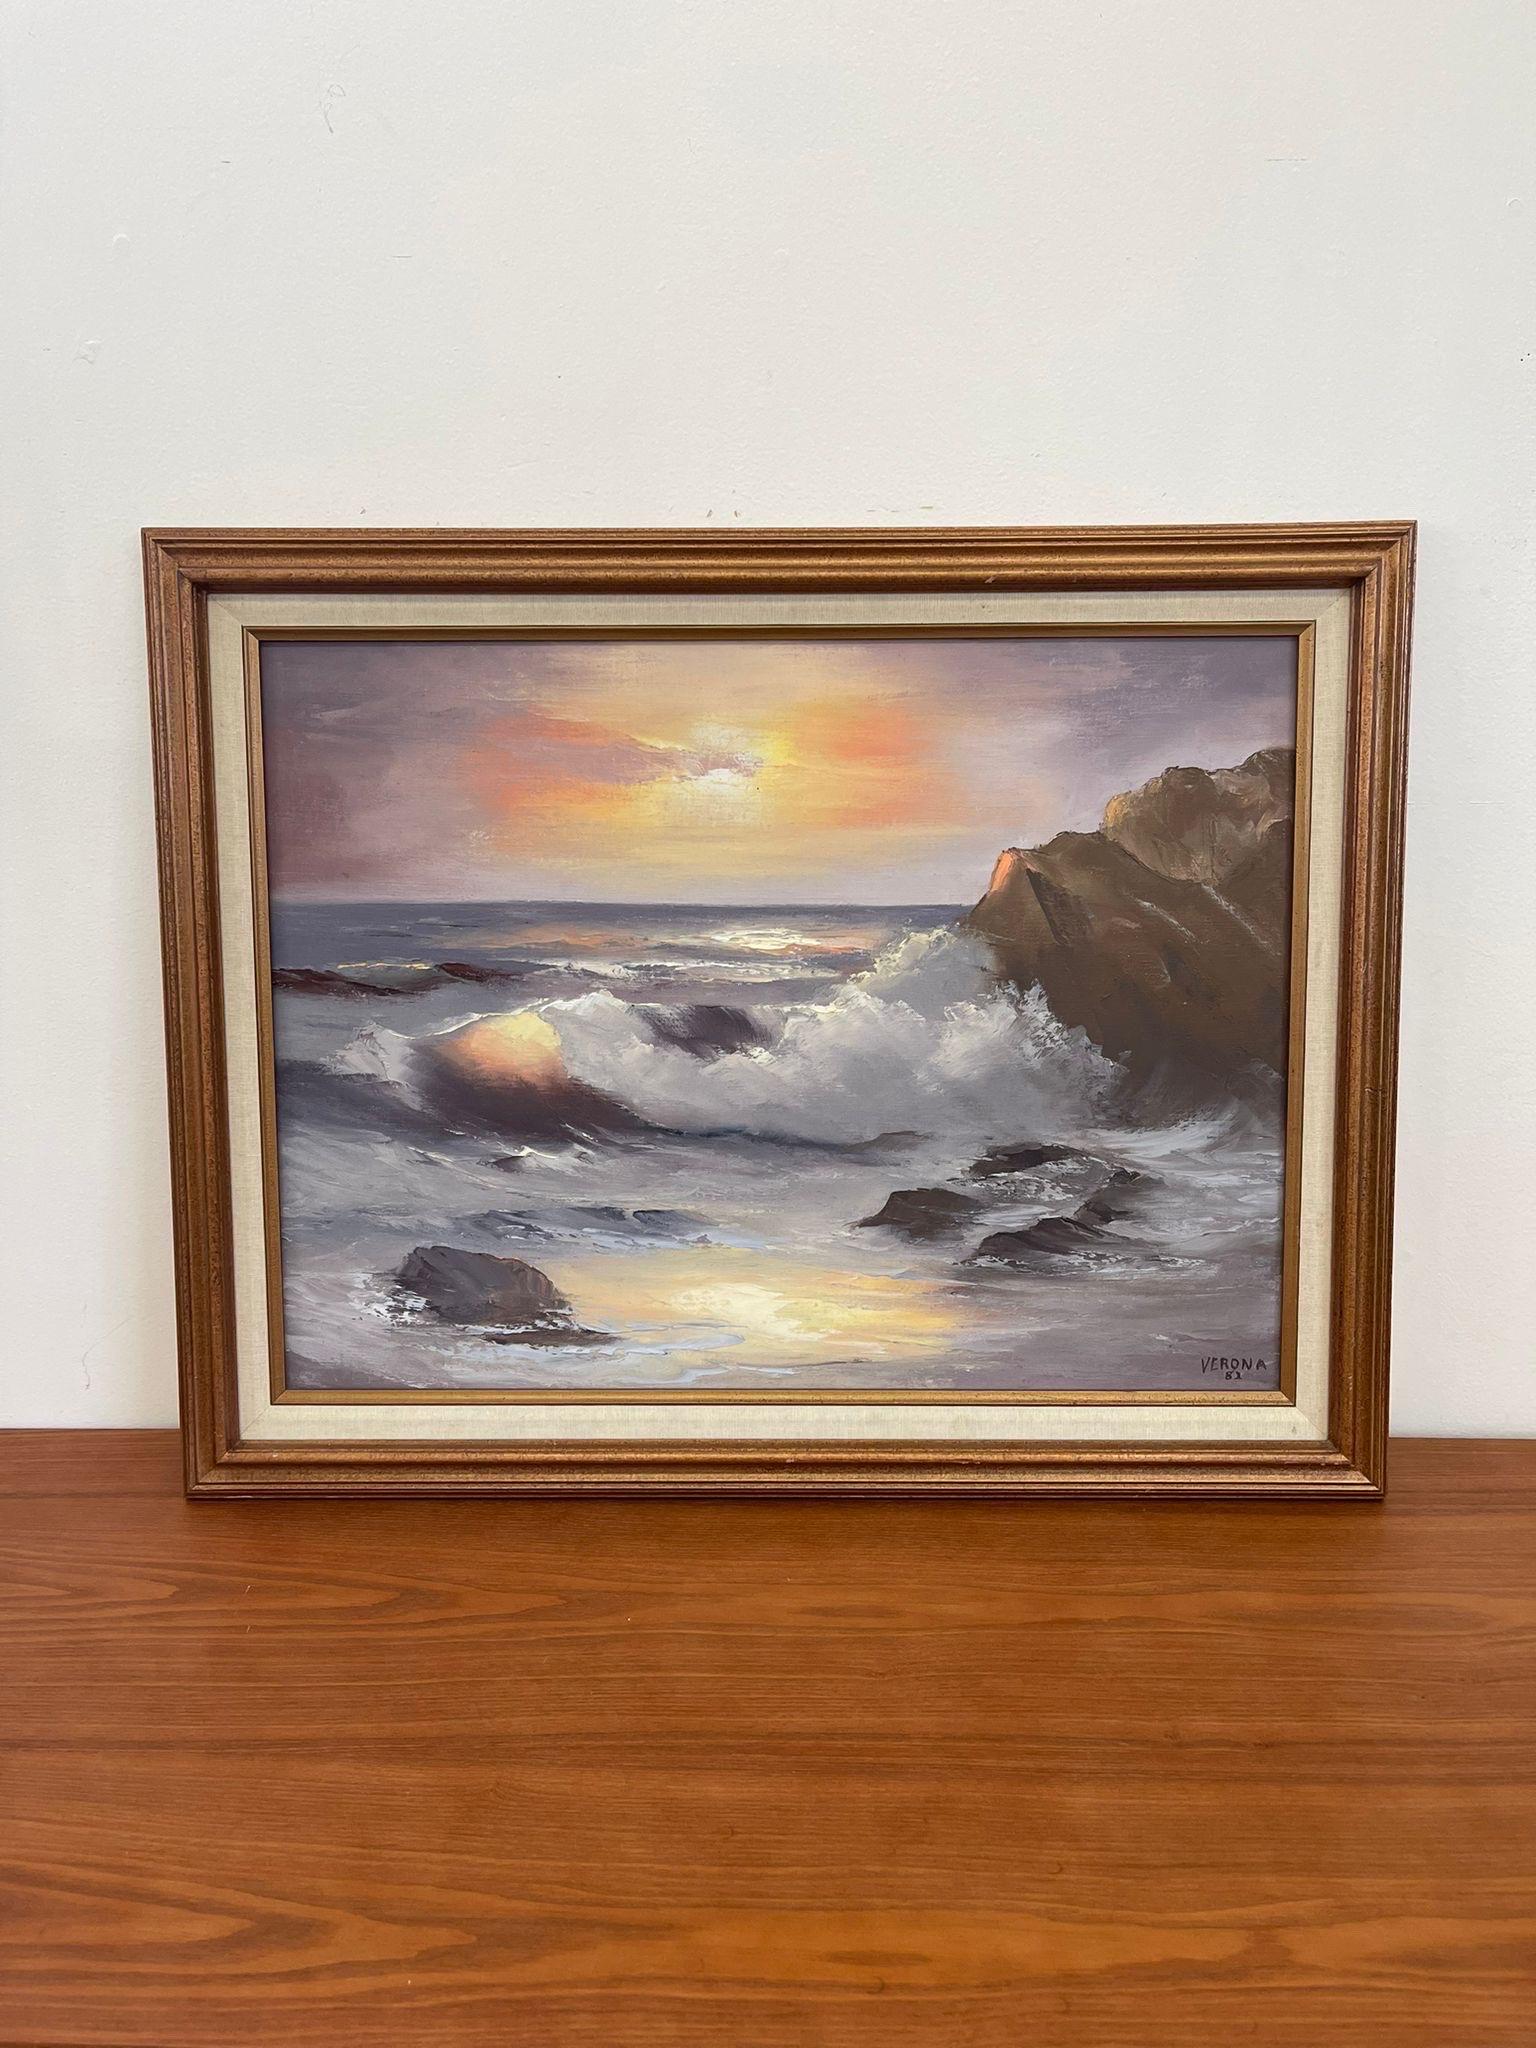 Possibly Oil or Acrylic on Canvas. Beautiful Sunset with Reflections on the water. Signed and Dated in the Lower corner as Pictured. Vintage Condition Consistent with Age as Pictured.

Dimensions. 28 1/2 W ; 22 H